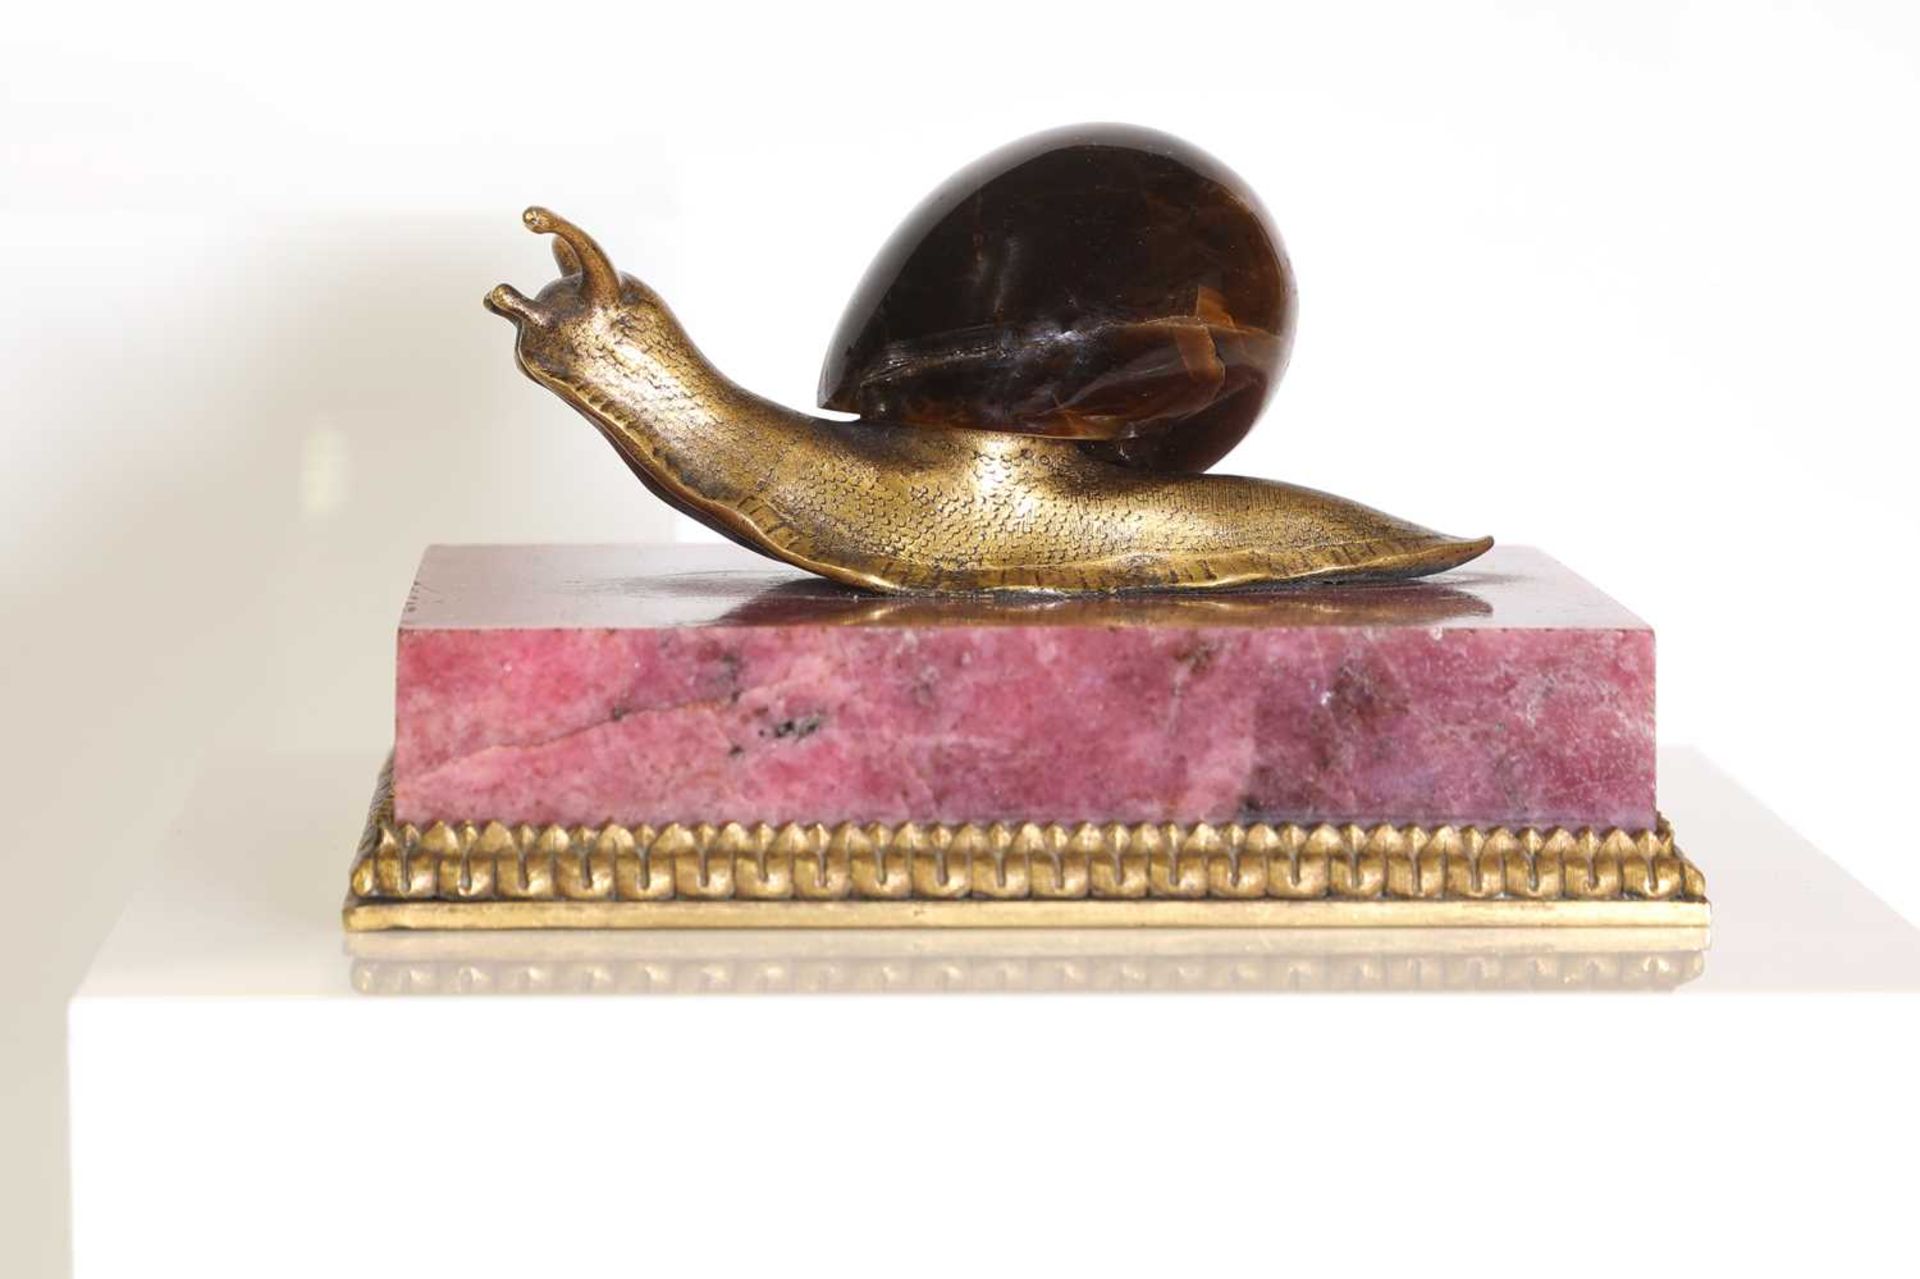 A tiger's eye and ormolu snail, - Image 10 of 25